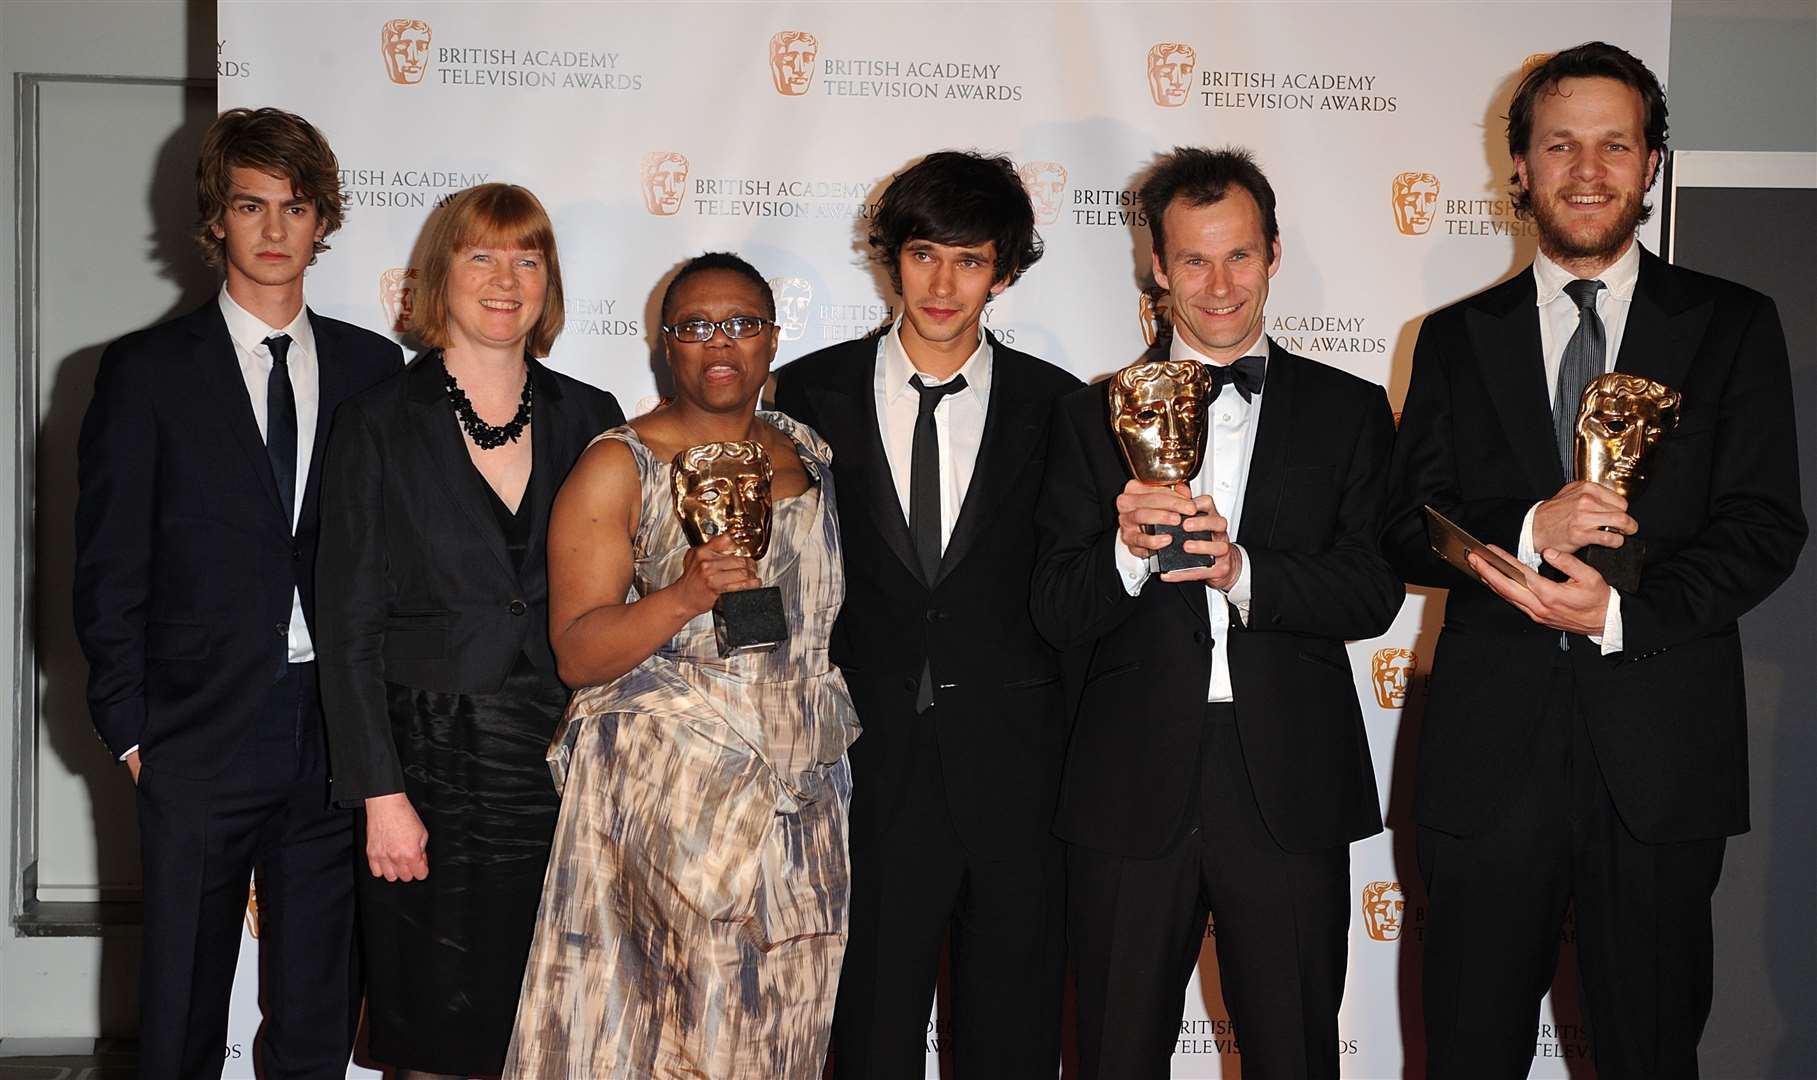 Pier Wilkie, Otto Bathurst and Peter Moffat pose with Ben Whishaw, centre, and presenter Andrew Garfield, far left, after Criminal Justice wins the award for Bafta drama serial award (Ian West/PA)